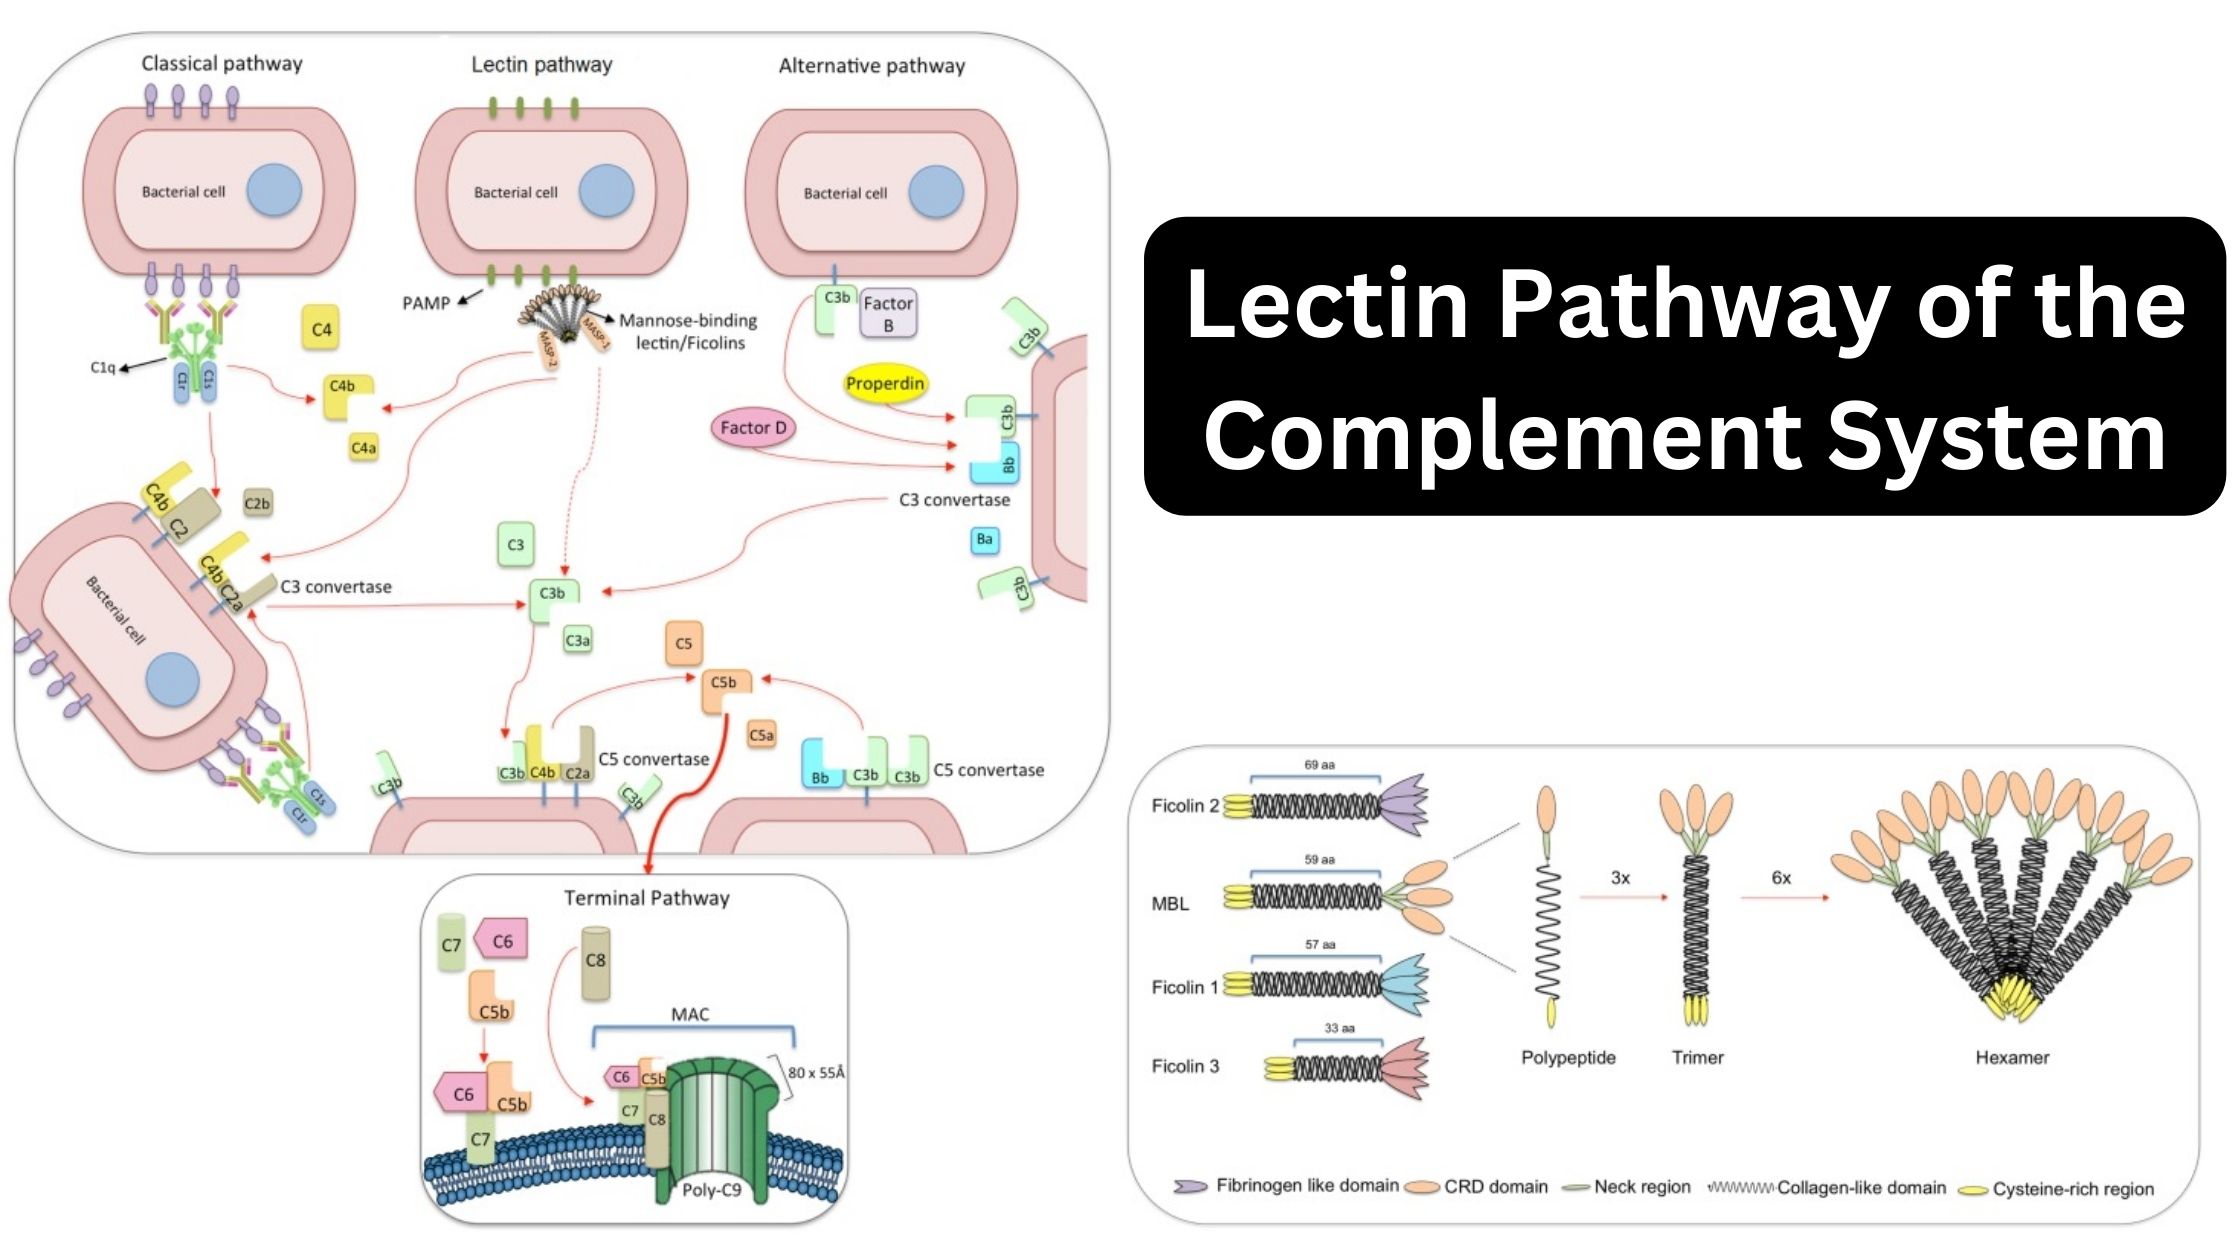 Lectin Pathway of the Complement System